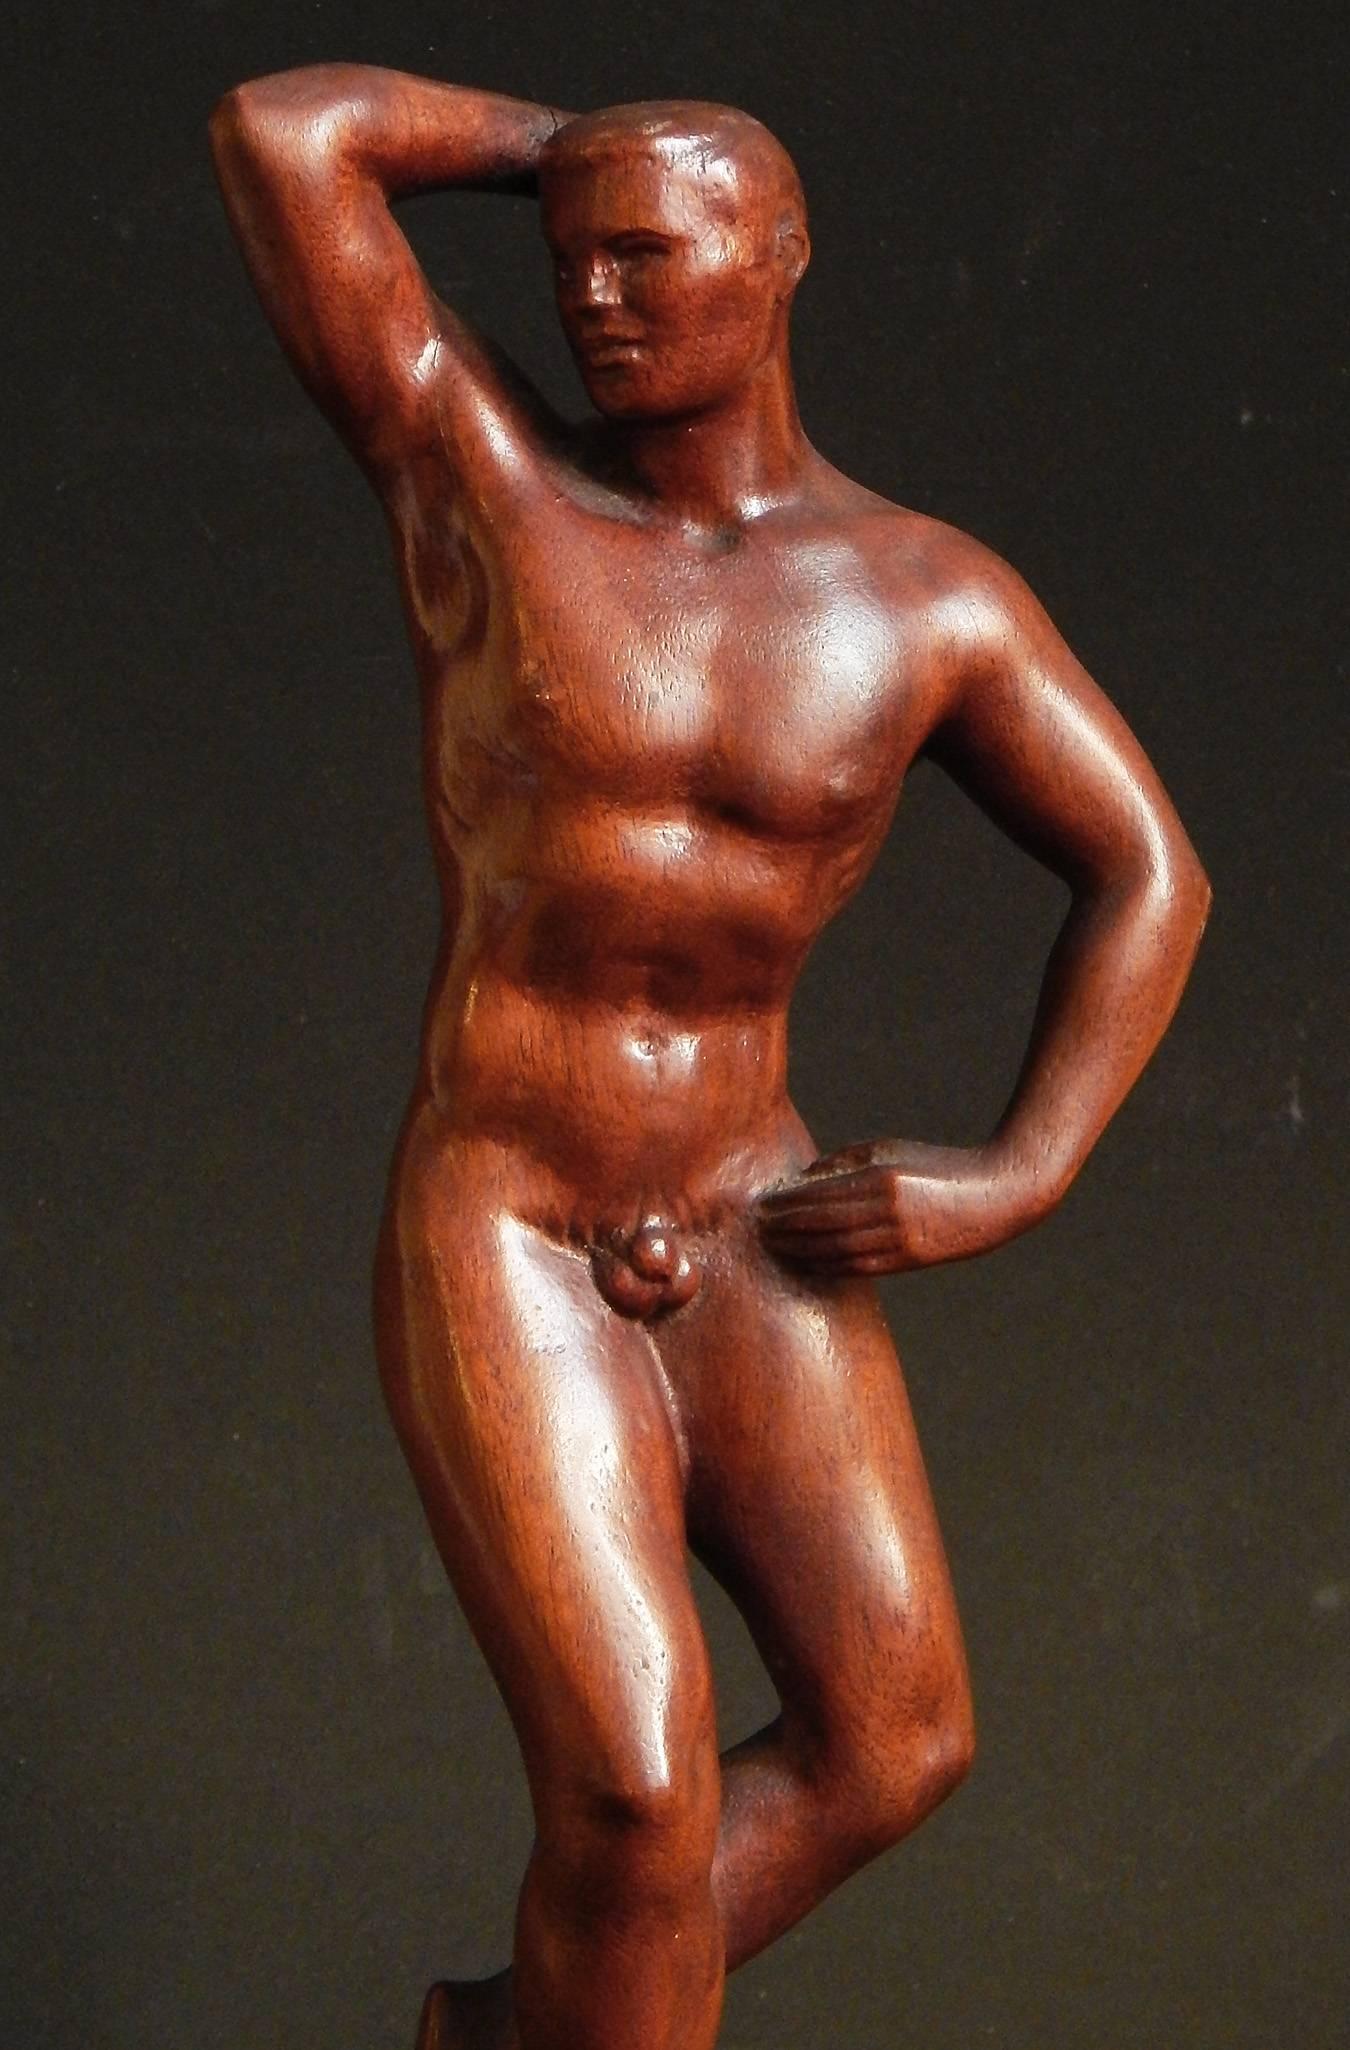 Beautifully sculpted from a ruddy block of mahogany and finished with a patina that gives it a lovely glow, this piece is a superb example of WPA-era sculpture. The artist, Raymond Turner, was a native of the Midwest who later won fame in New York,